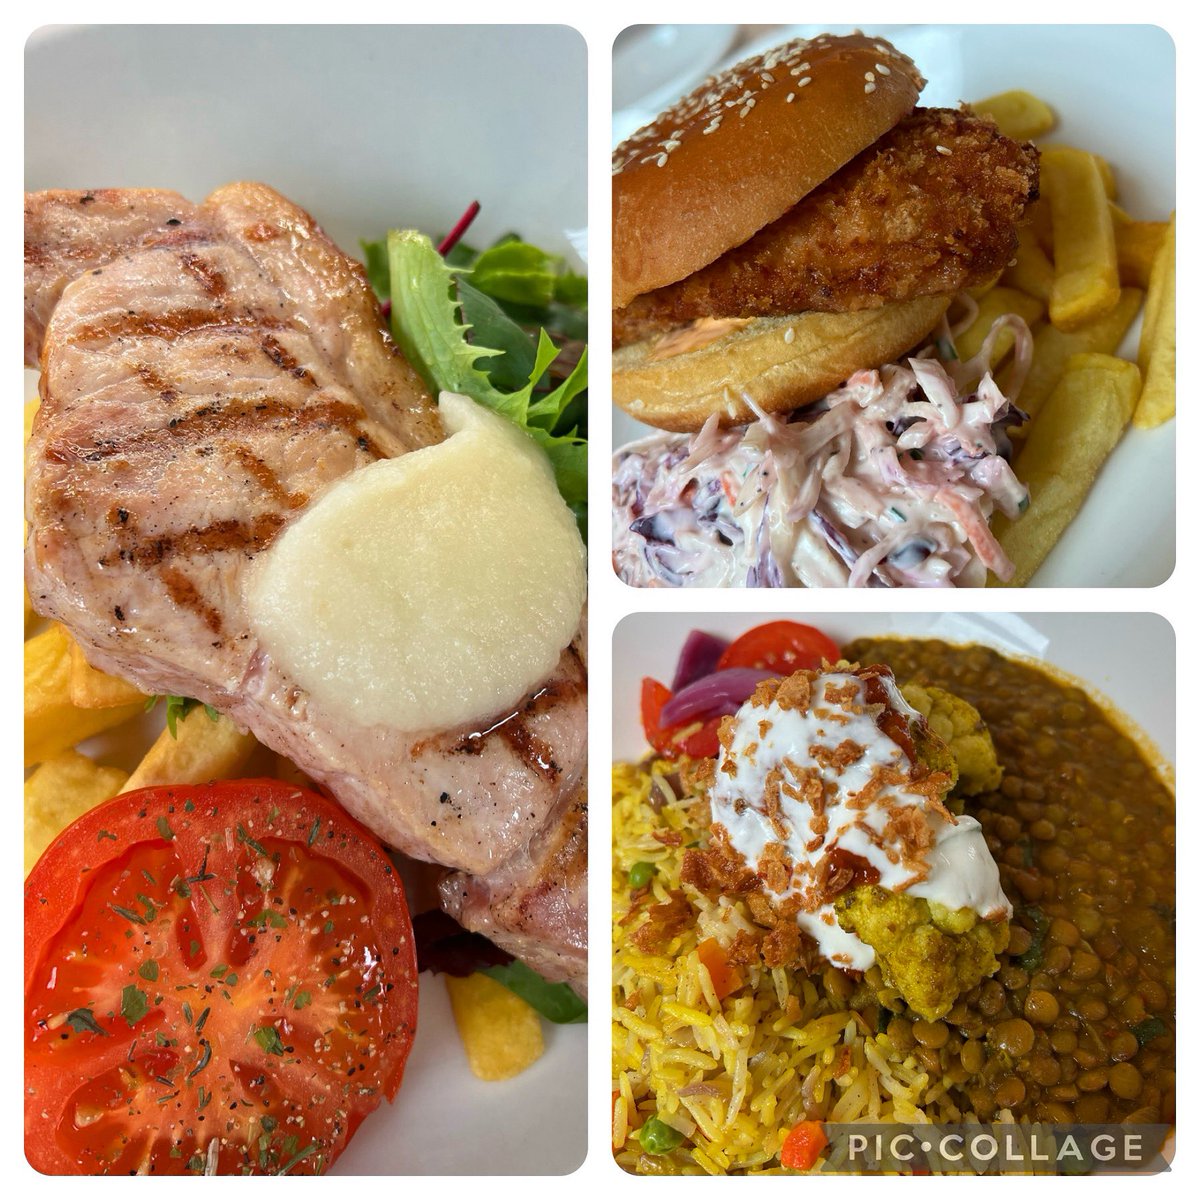 Today in the St Peter’s EDUkitchen we are serving: -Grilled Bacon Steak, Chips, Tomato and Apple Sauce -Korean Fried Chicken Burger, Chilli Mayo, Chips & Slaw -Cumin Roasted Cauliflower, Lentil Dhal, Mint Yoghurt and Lime Pickle @LoveBritishFood #greathospitalfood